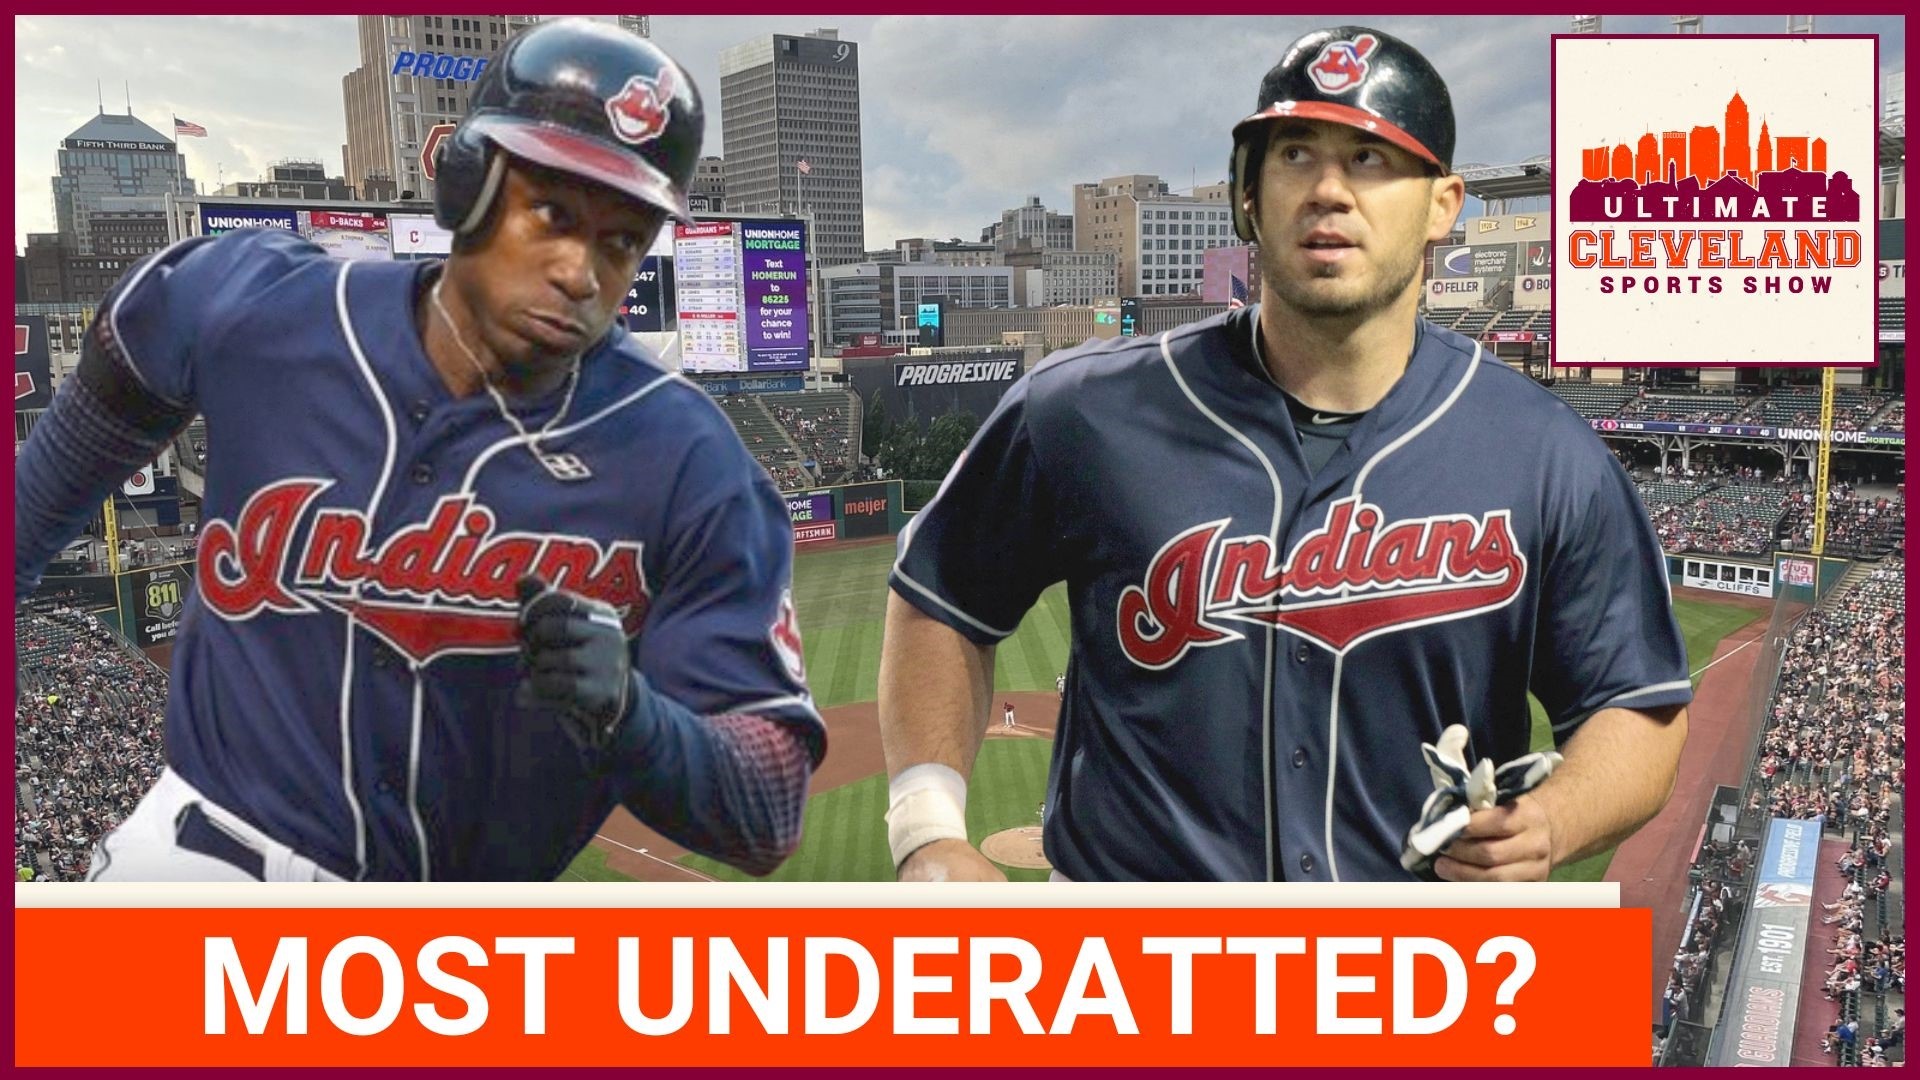 The Cleveland Guardians have had their ups and downs over the years but who is the most underrated player in the teams history?